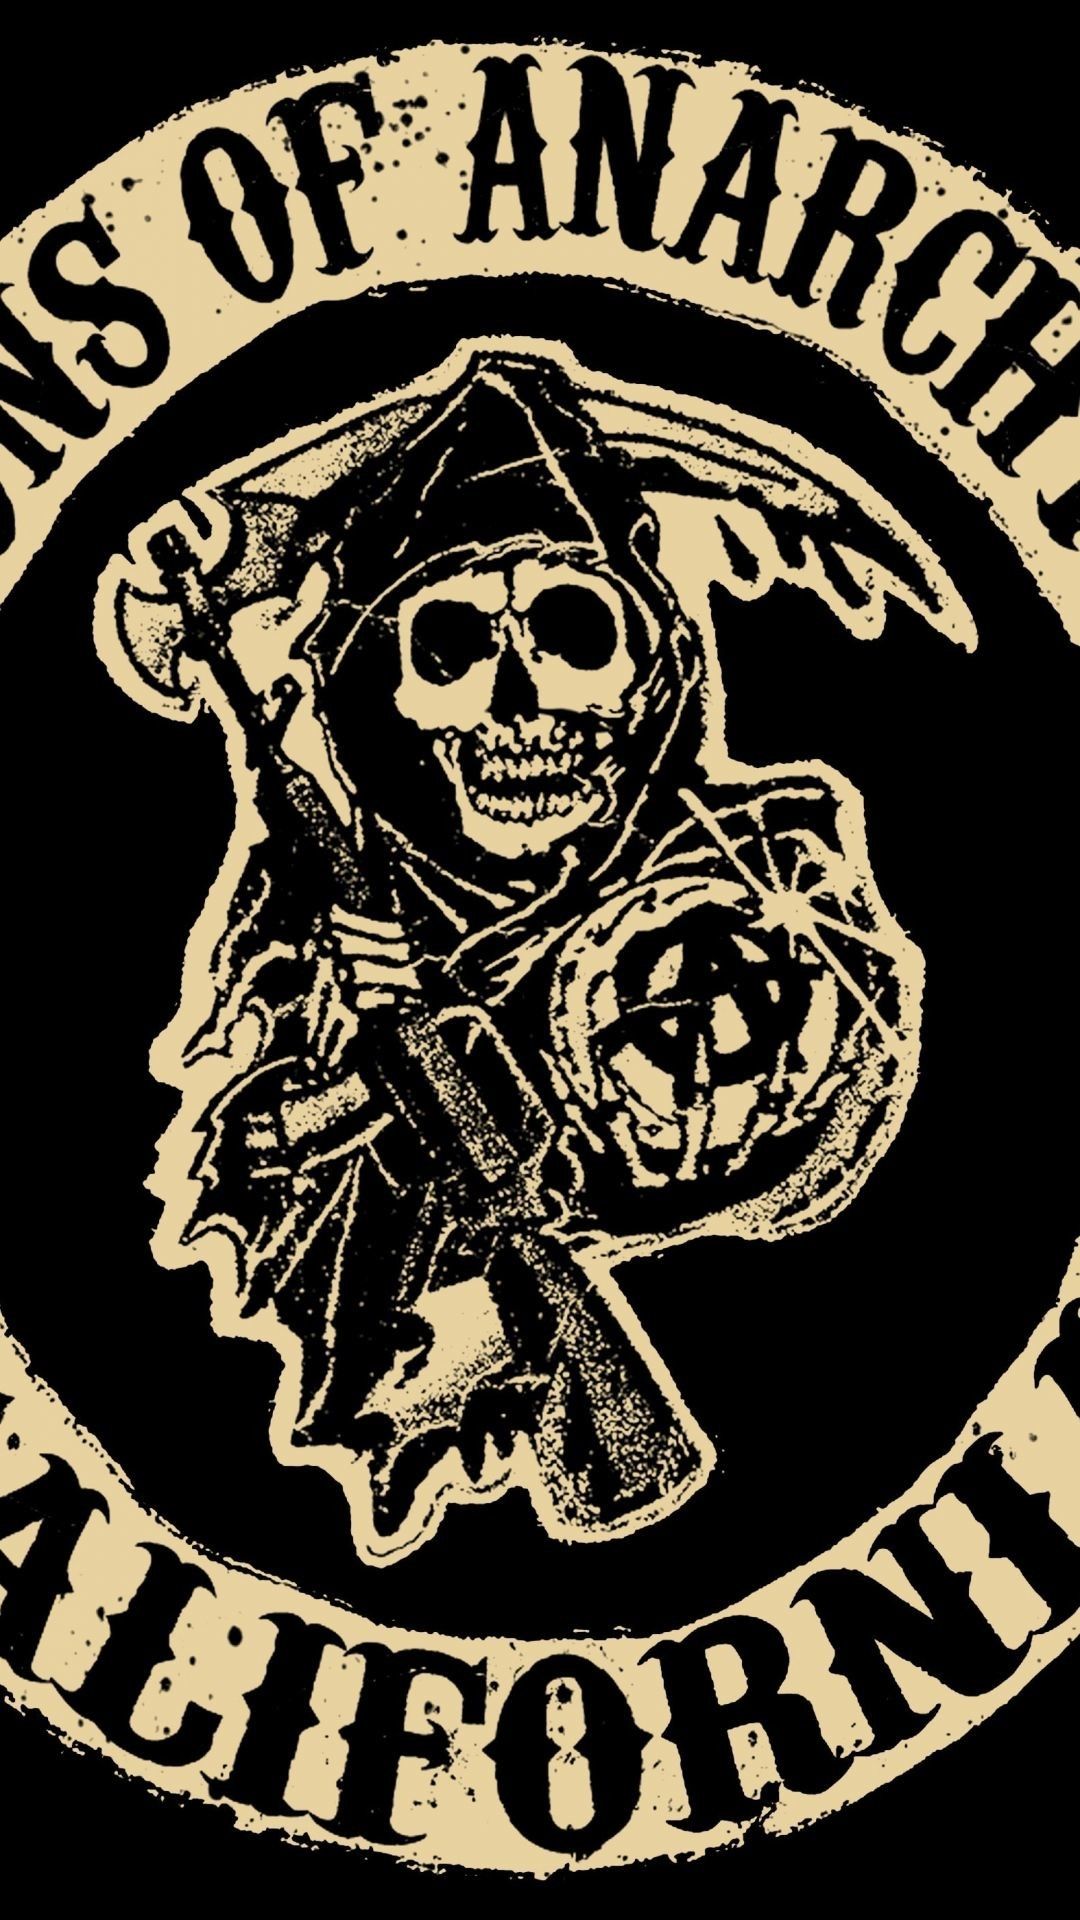 Sons of Anarchy Wallpaper iPhone. Sons of anarchy tattoos, Sons of anarchy, Anarchy